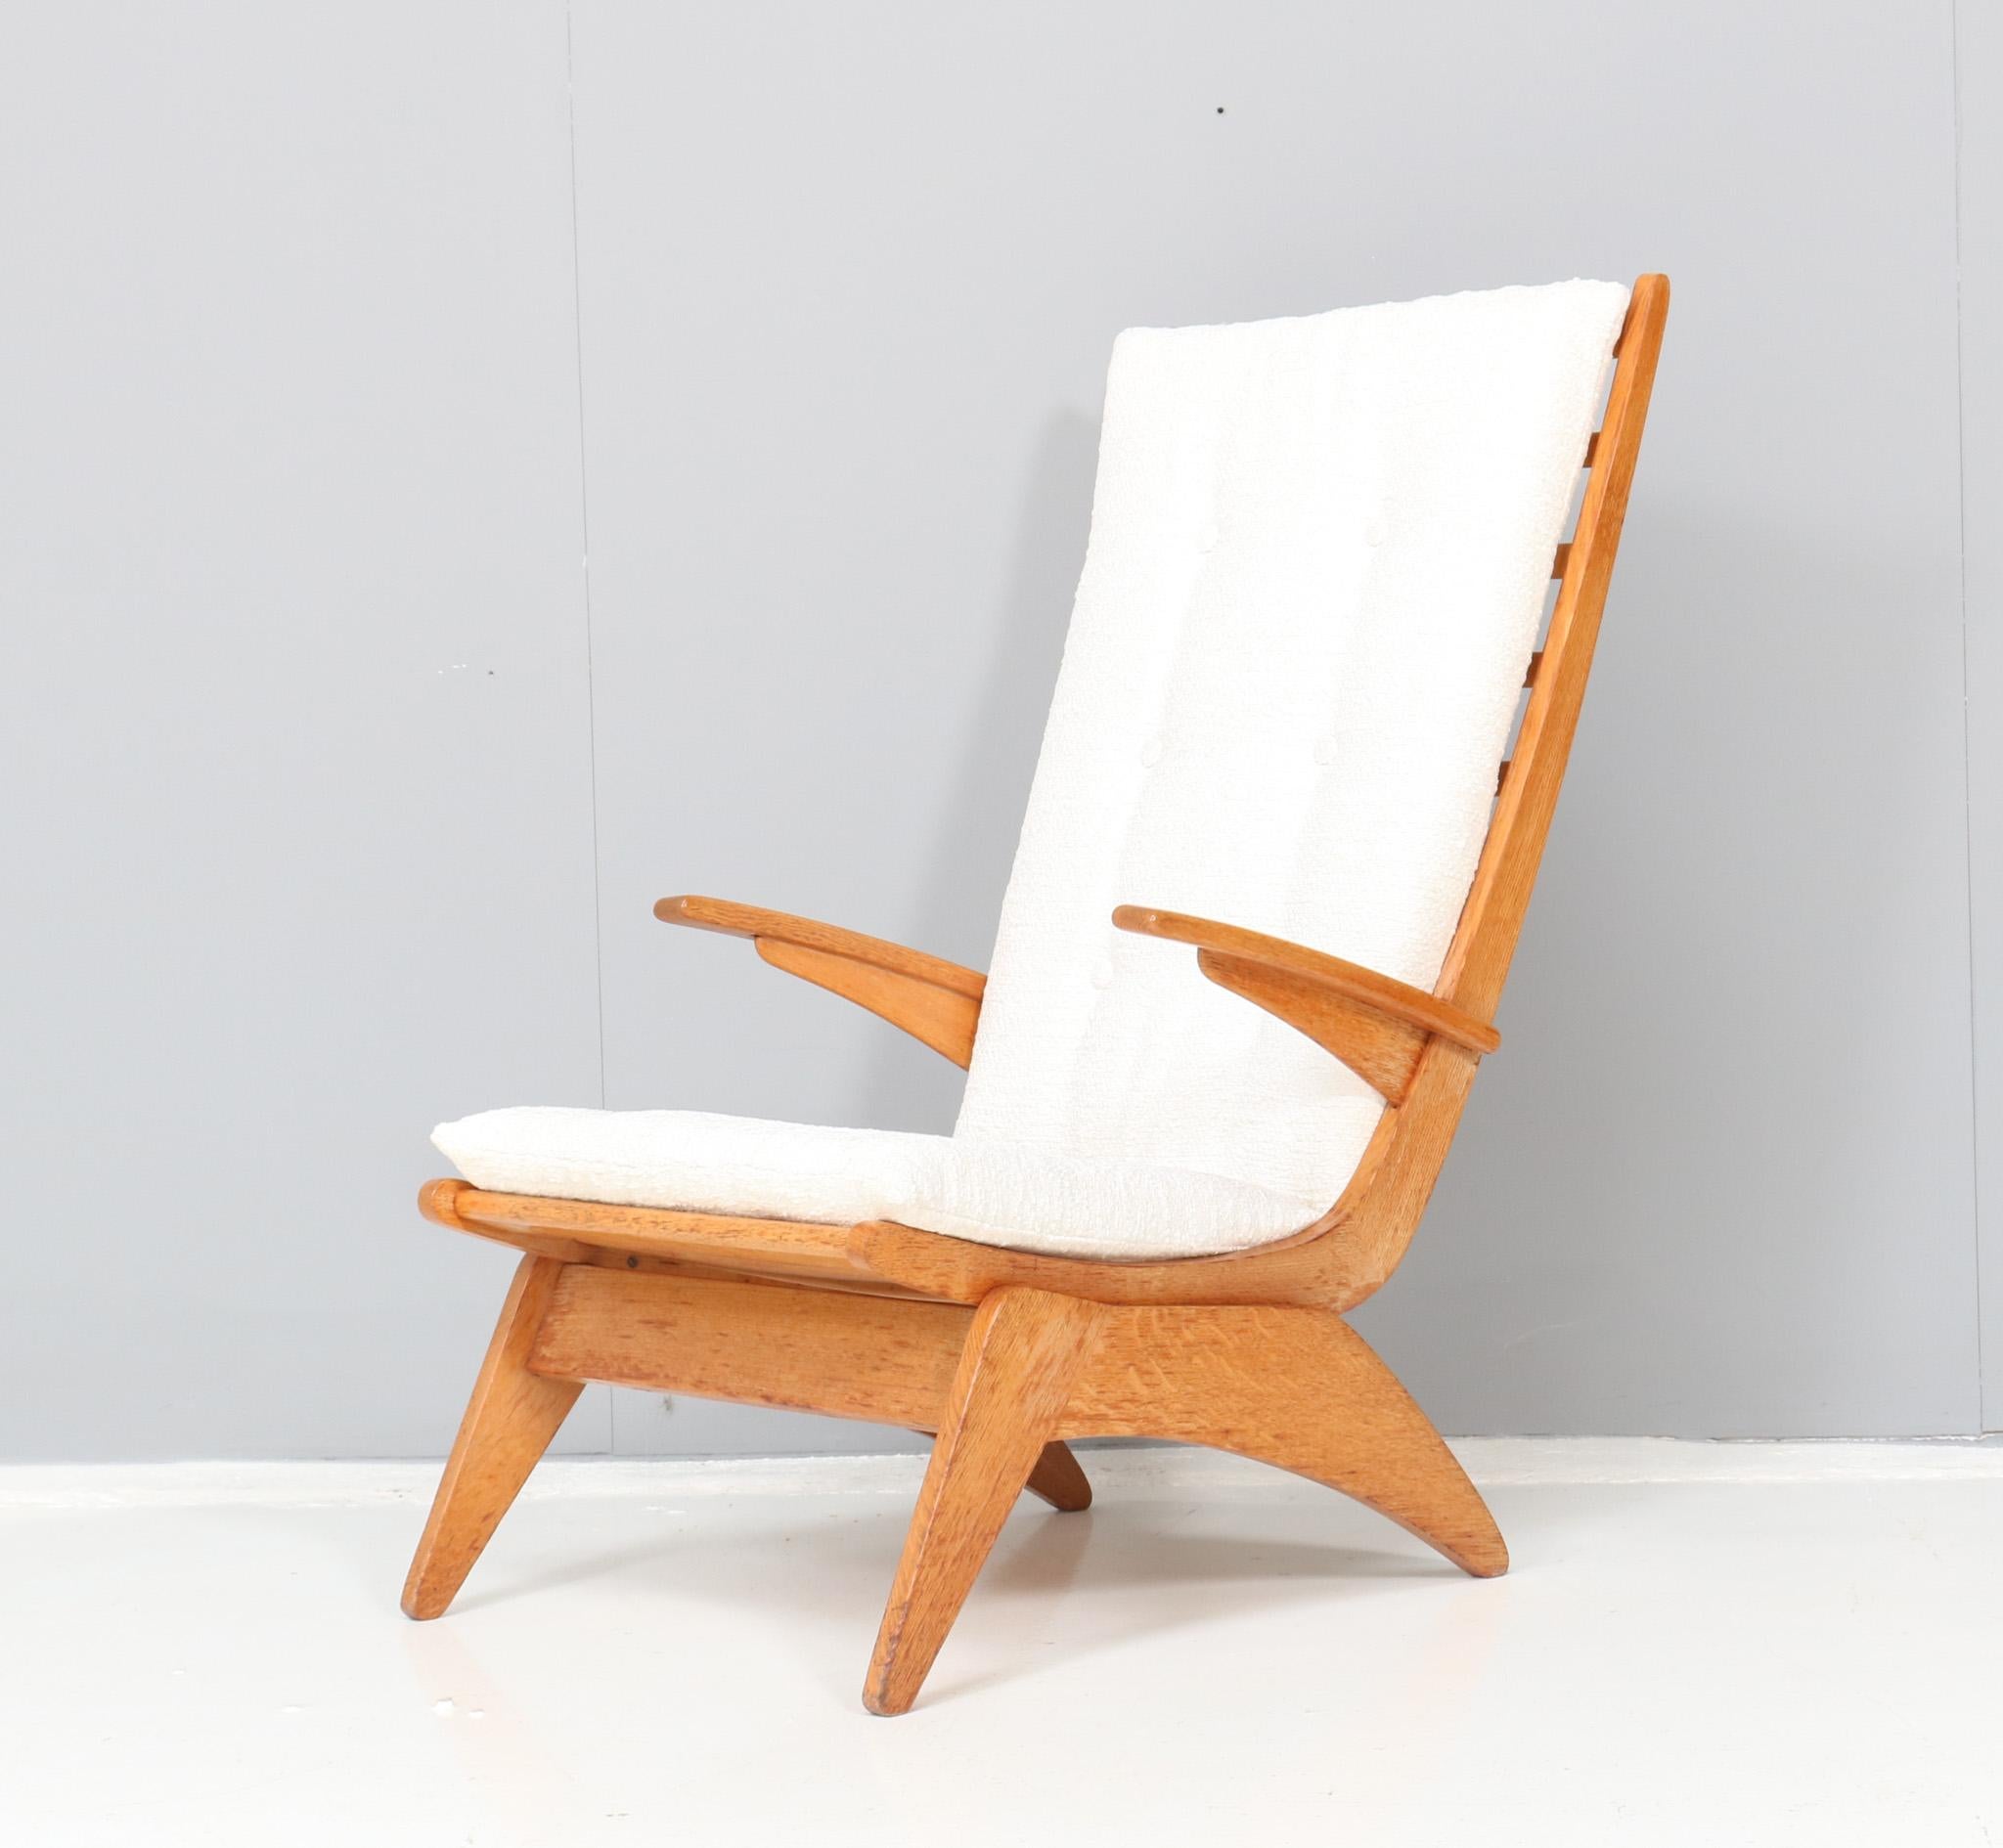 Mid-20th Century Mid-Century Modern High Back Lounge Chair by Jan den Drijver for De Stijl, 1950s For Sale